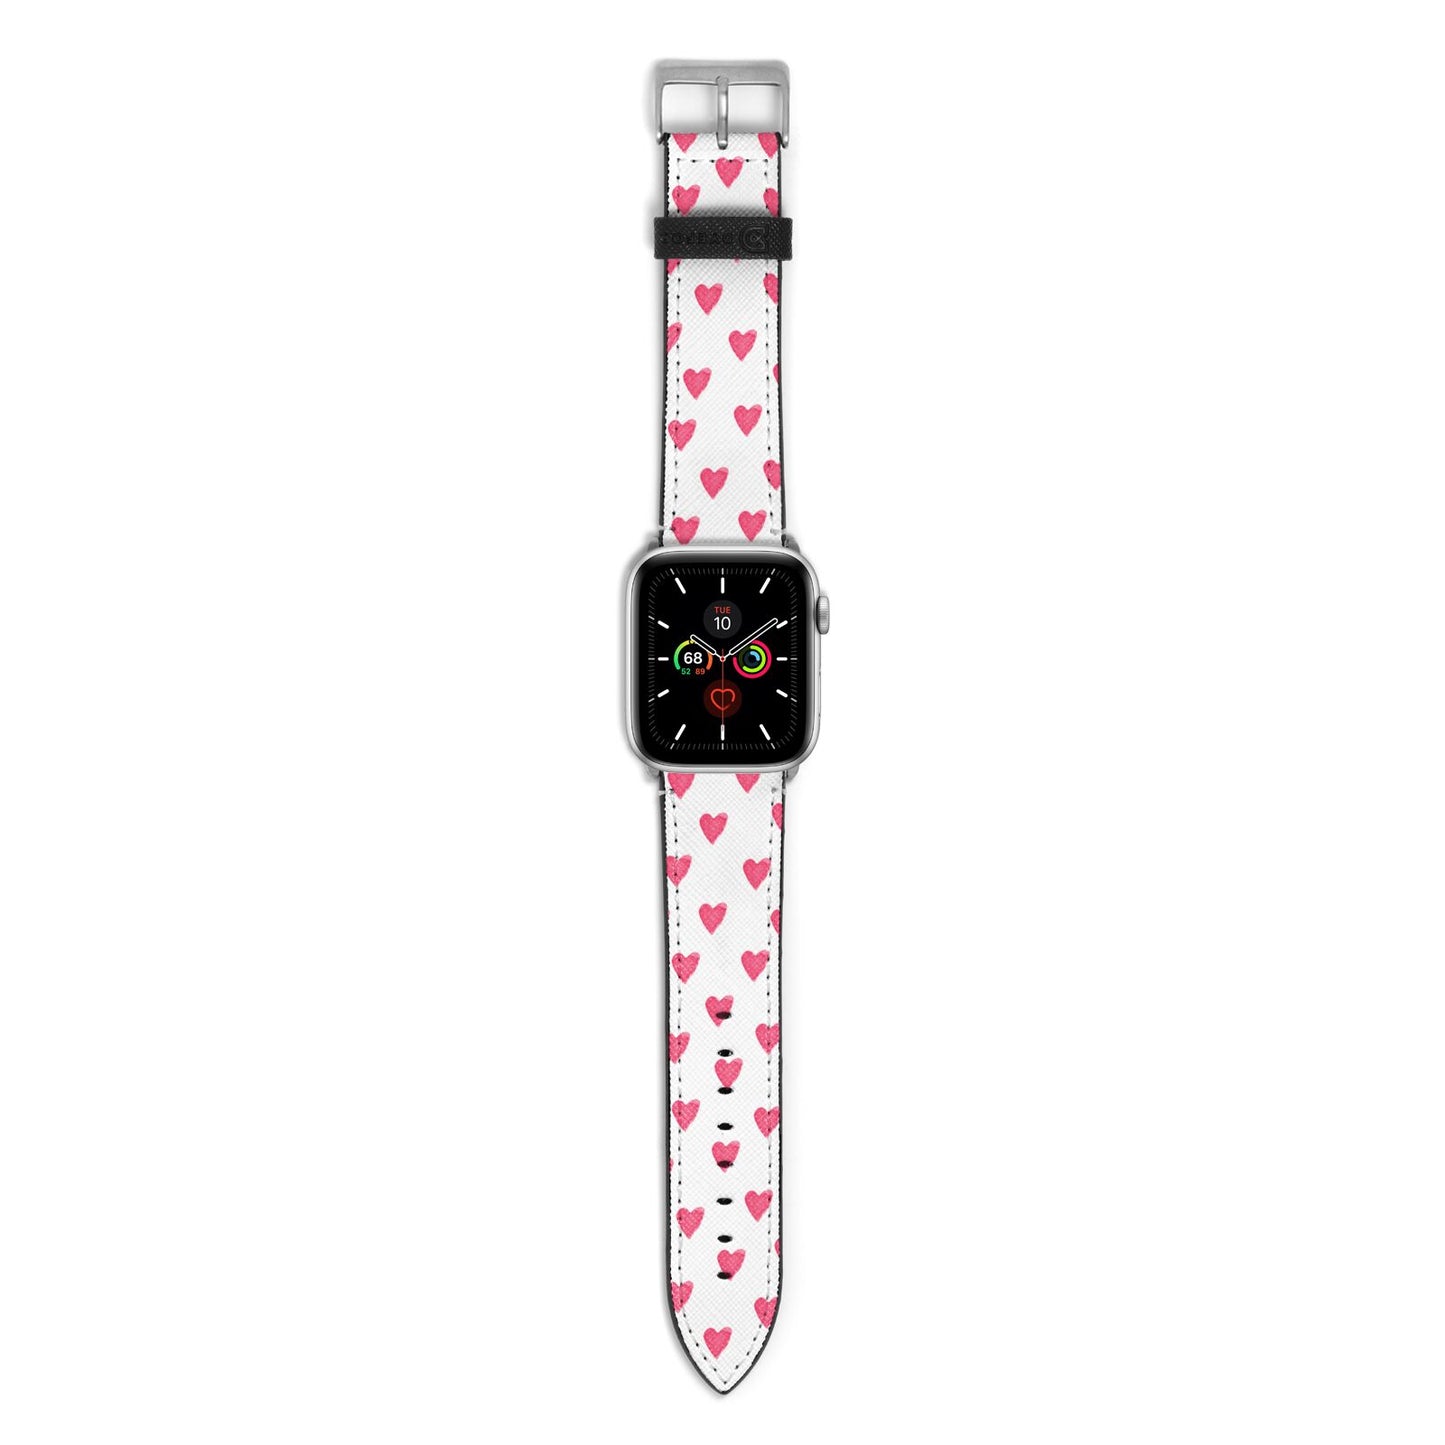 Heart Patterned Apple Watch Strap with Silver Hardware